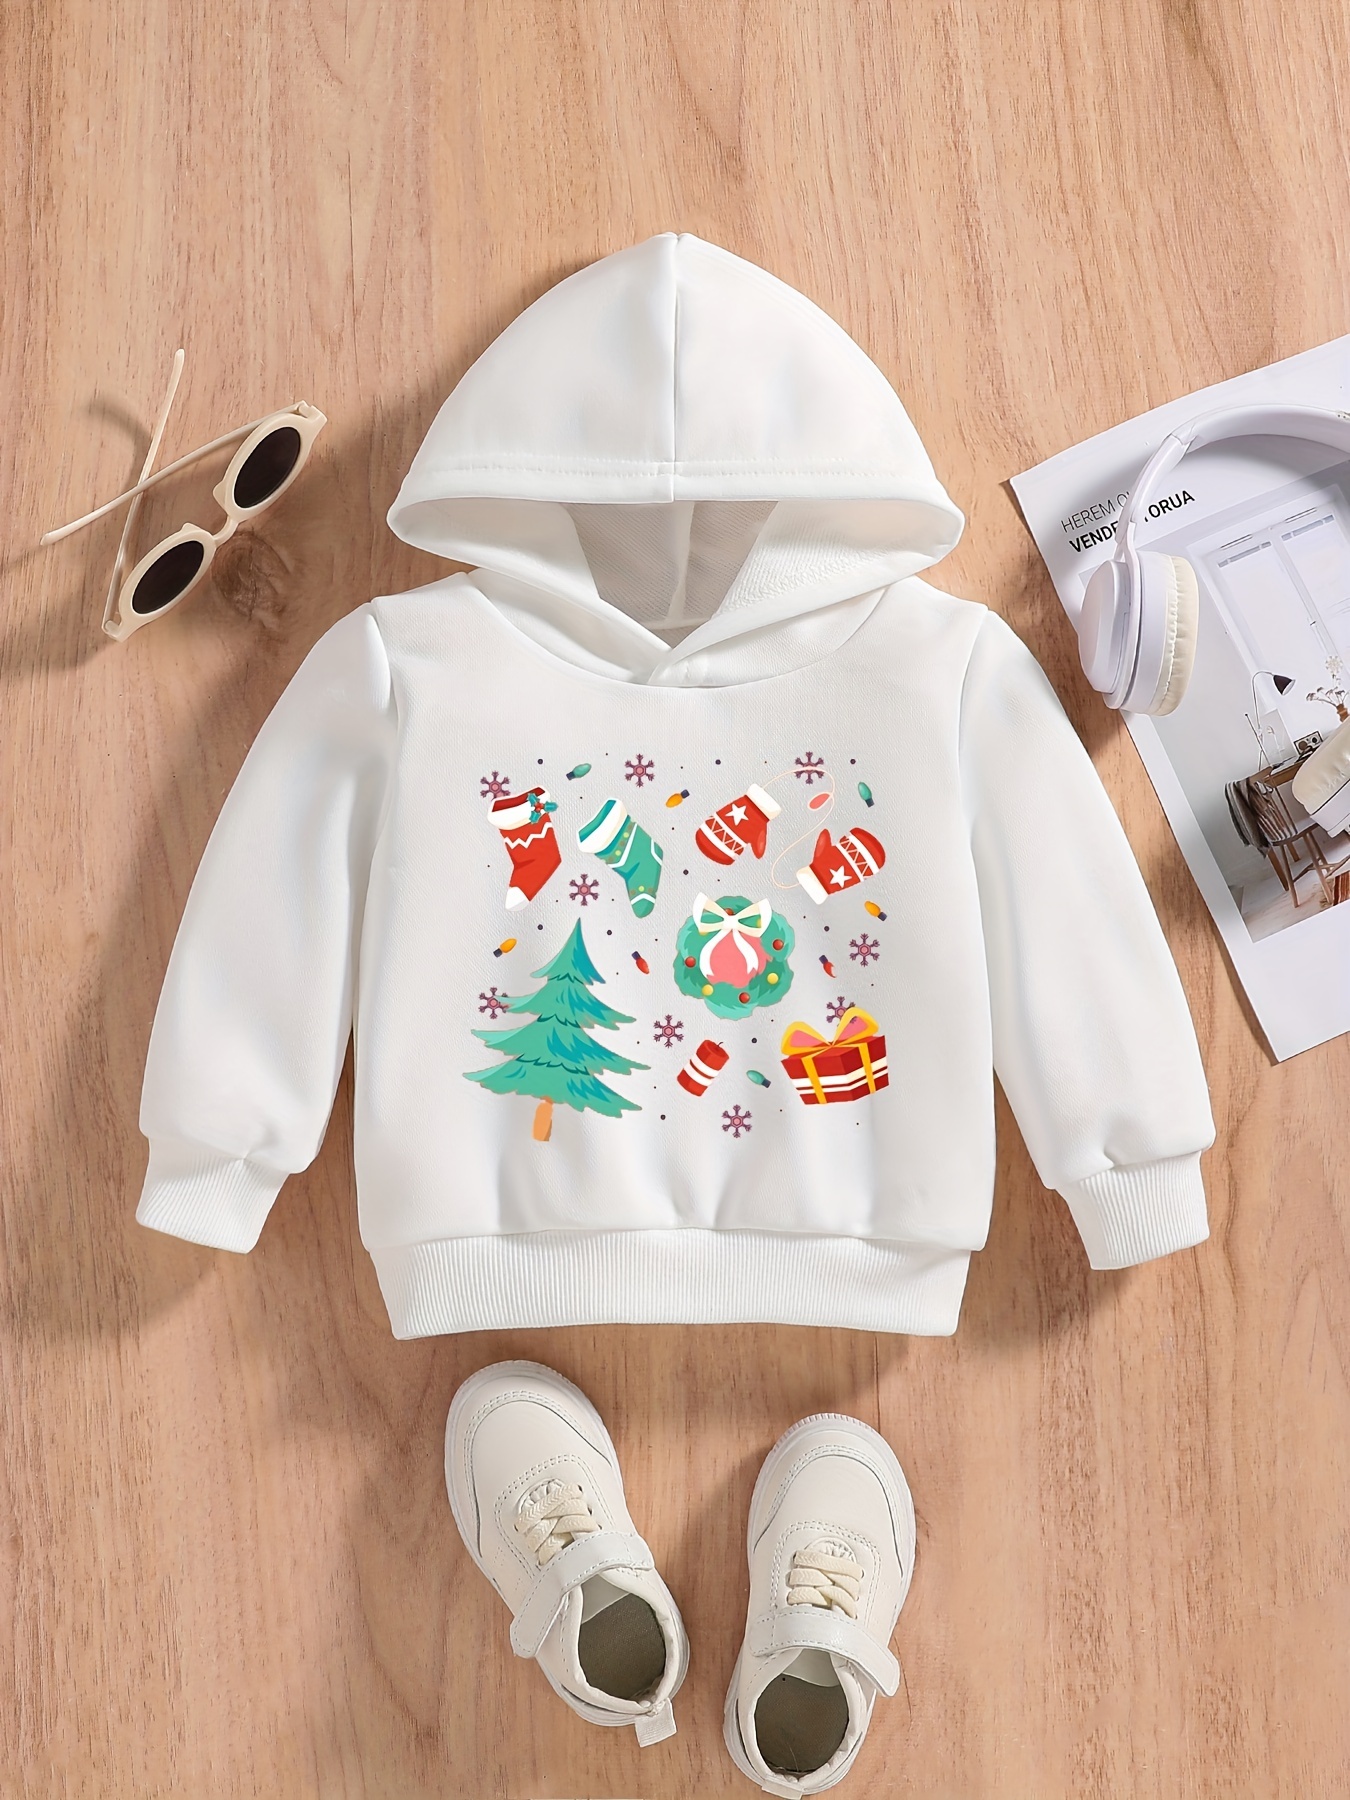 Christmas Tree and Snowman Pattern Black Baby Boy/Girl Long-sleeve Knitted Sweater